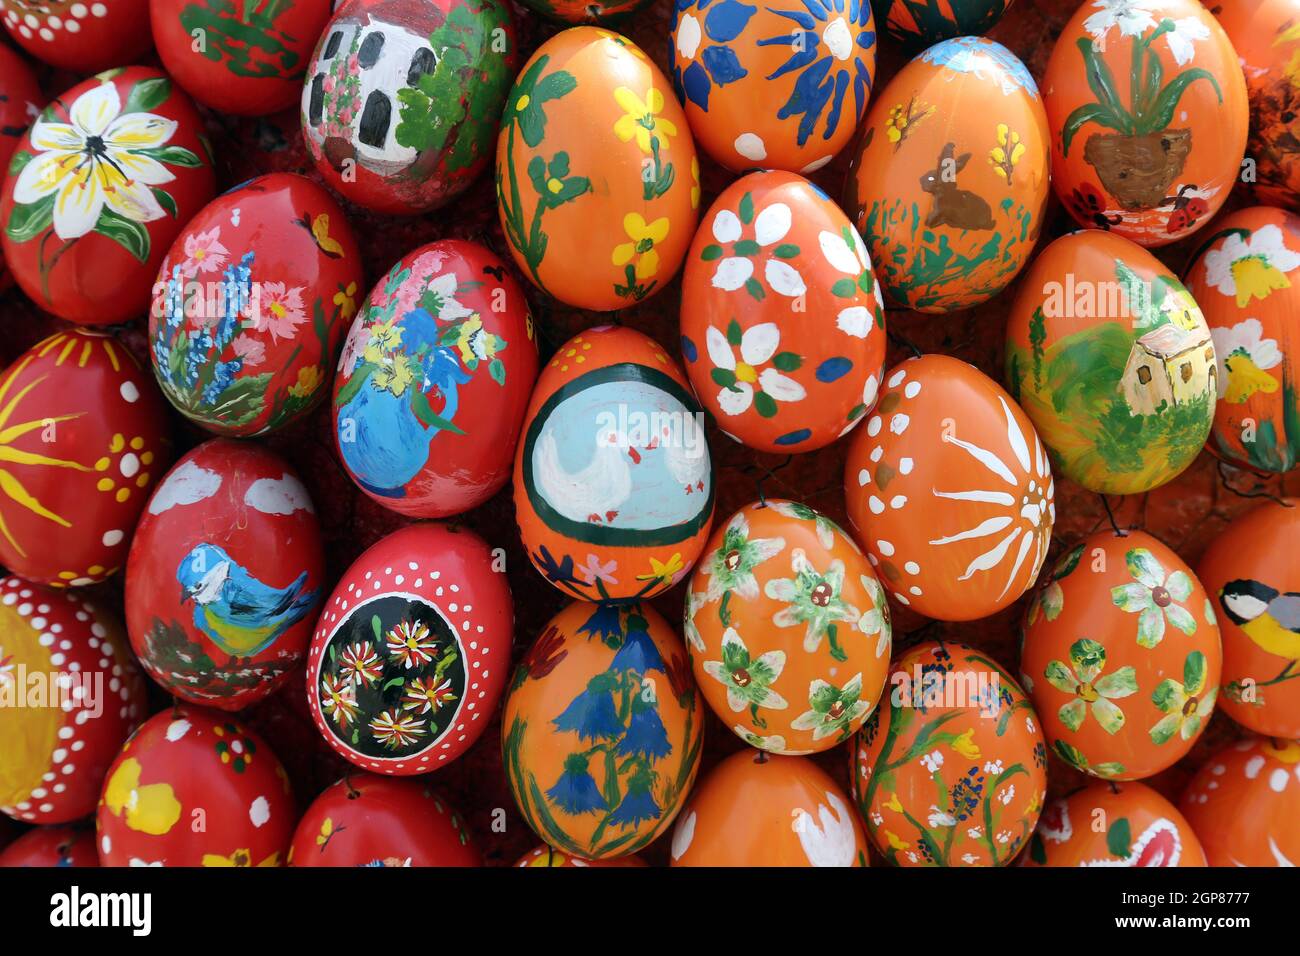 Easter eggs exposed in front of the parish church of St. Stephen in Wasseralfingen, Germany Stock Photo